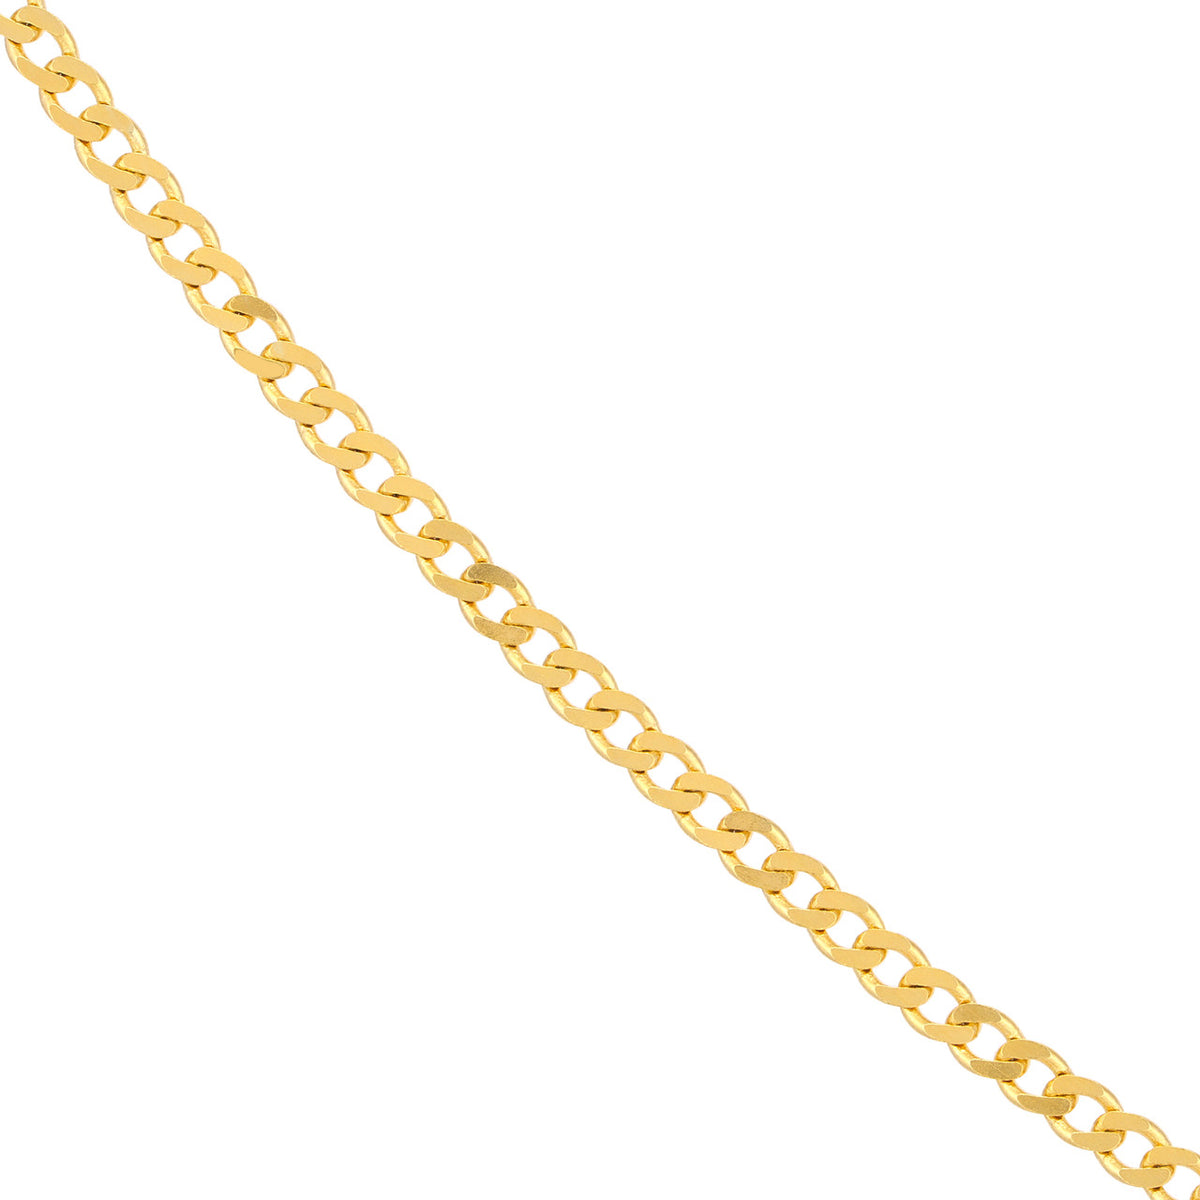 14K Yellow Gold or White Gold or Rose Gold 1.95mm Open Curb Chain Necklace with Spring Ring